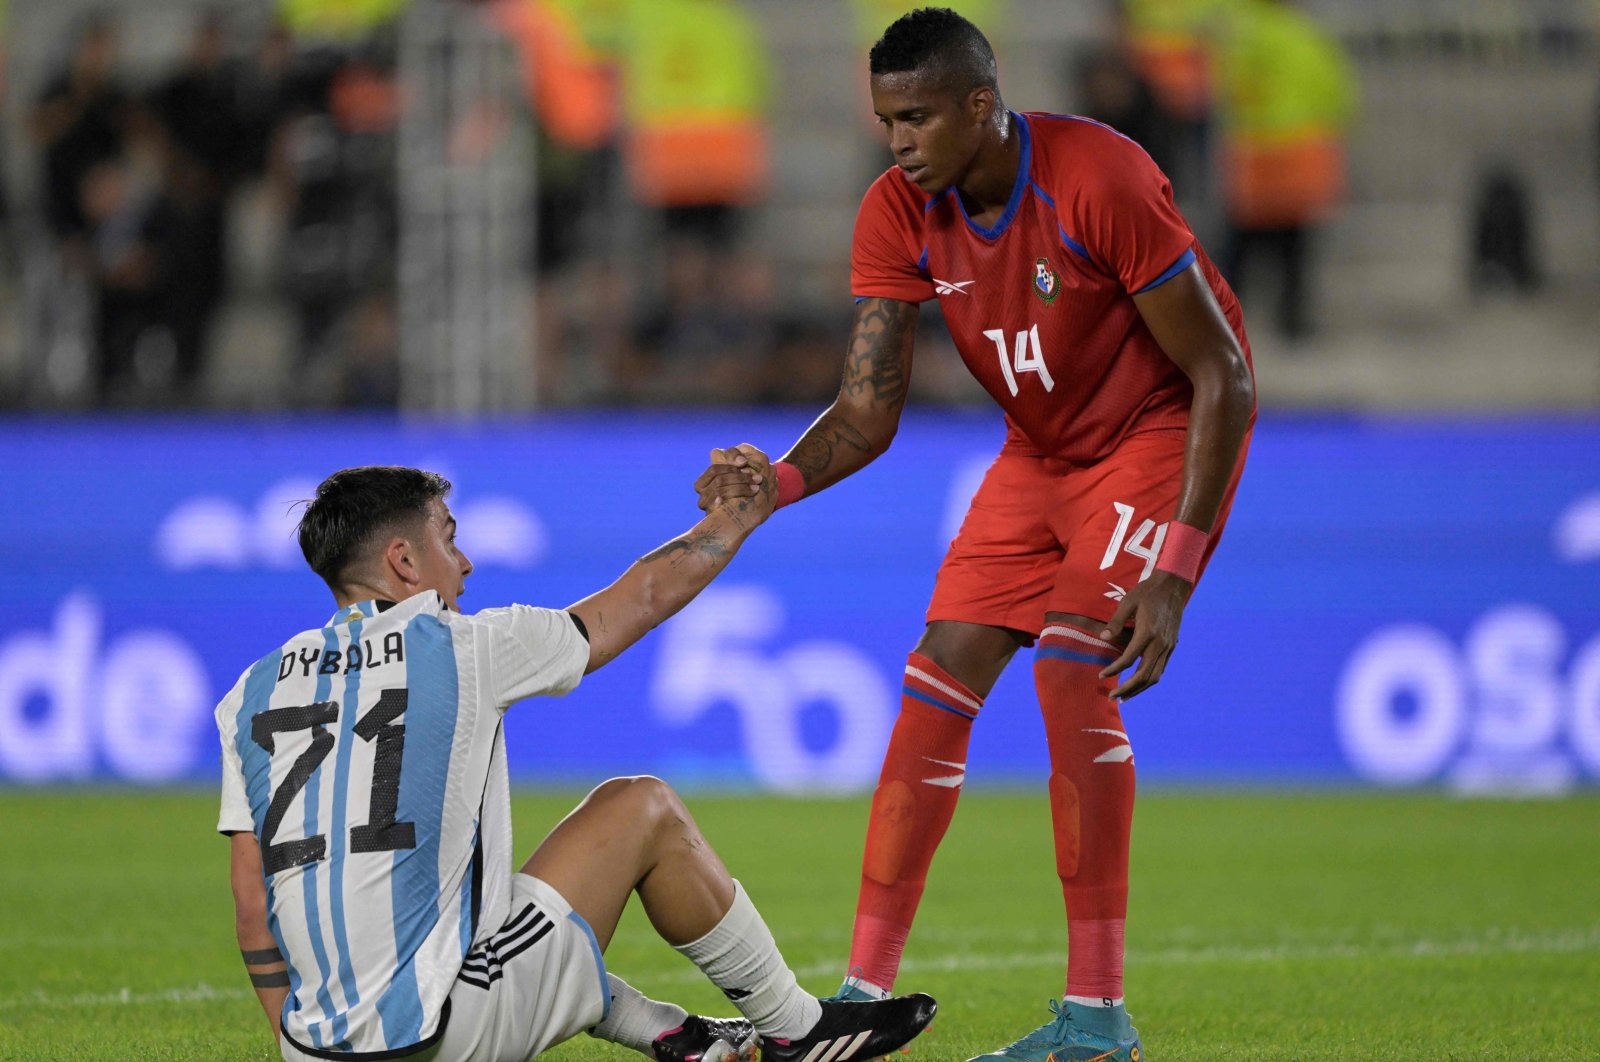 Panama&#039;s defender Gilberto Hernandez (R) helps Argentina&#039;s forward Paulo Dybala stand up during the friendly football match between Argentina and Panama at the Monumental stadium, Buenos Aires, Argentina, March 23, 2023. (AFP Photo)